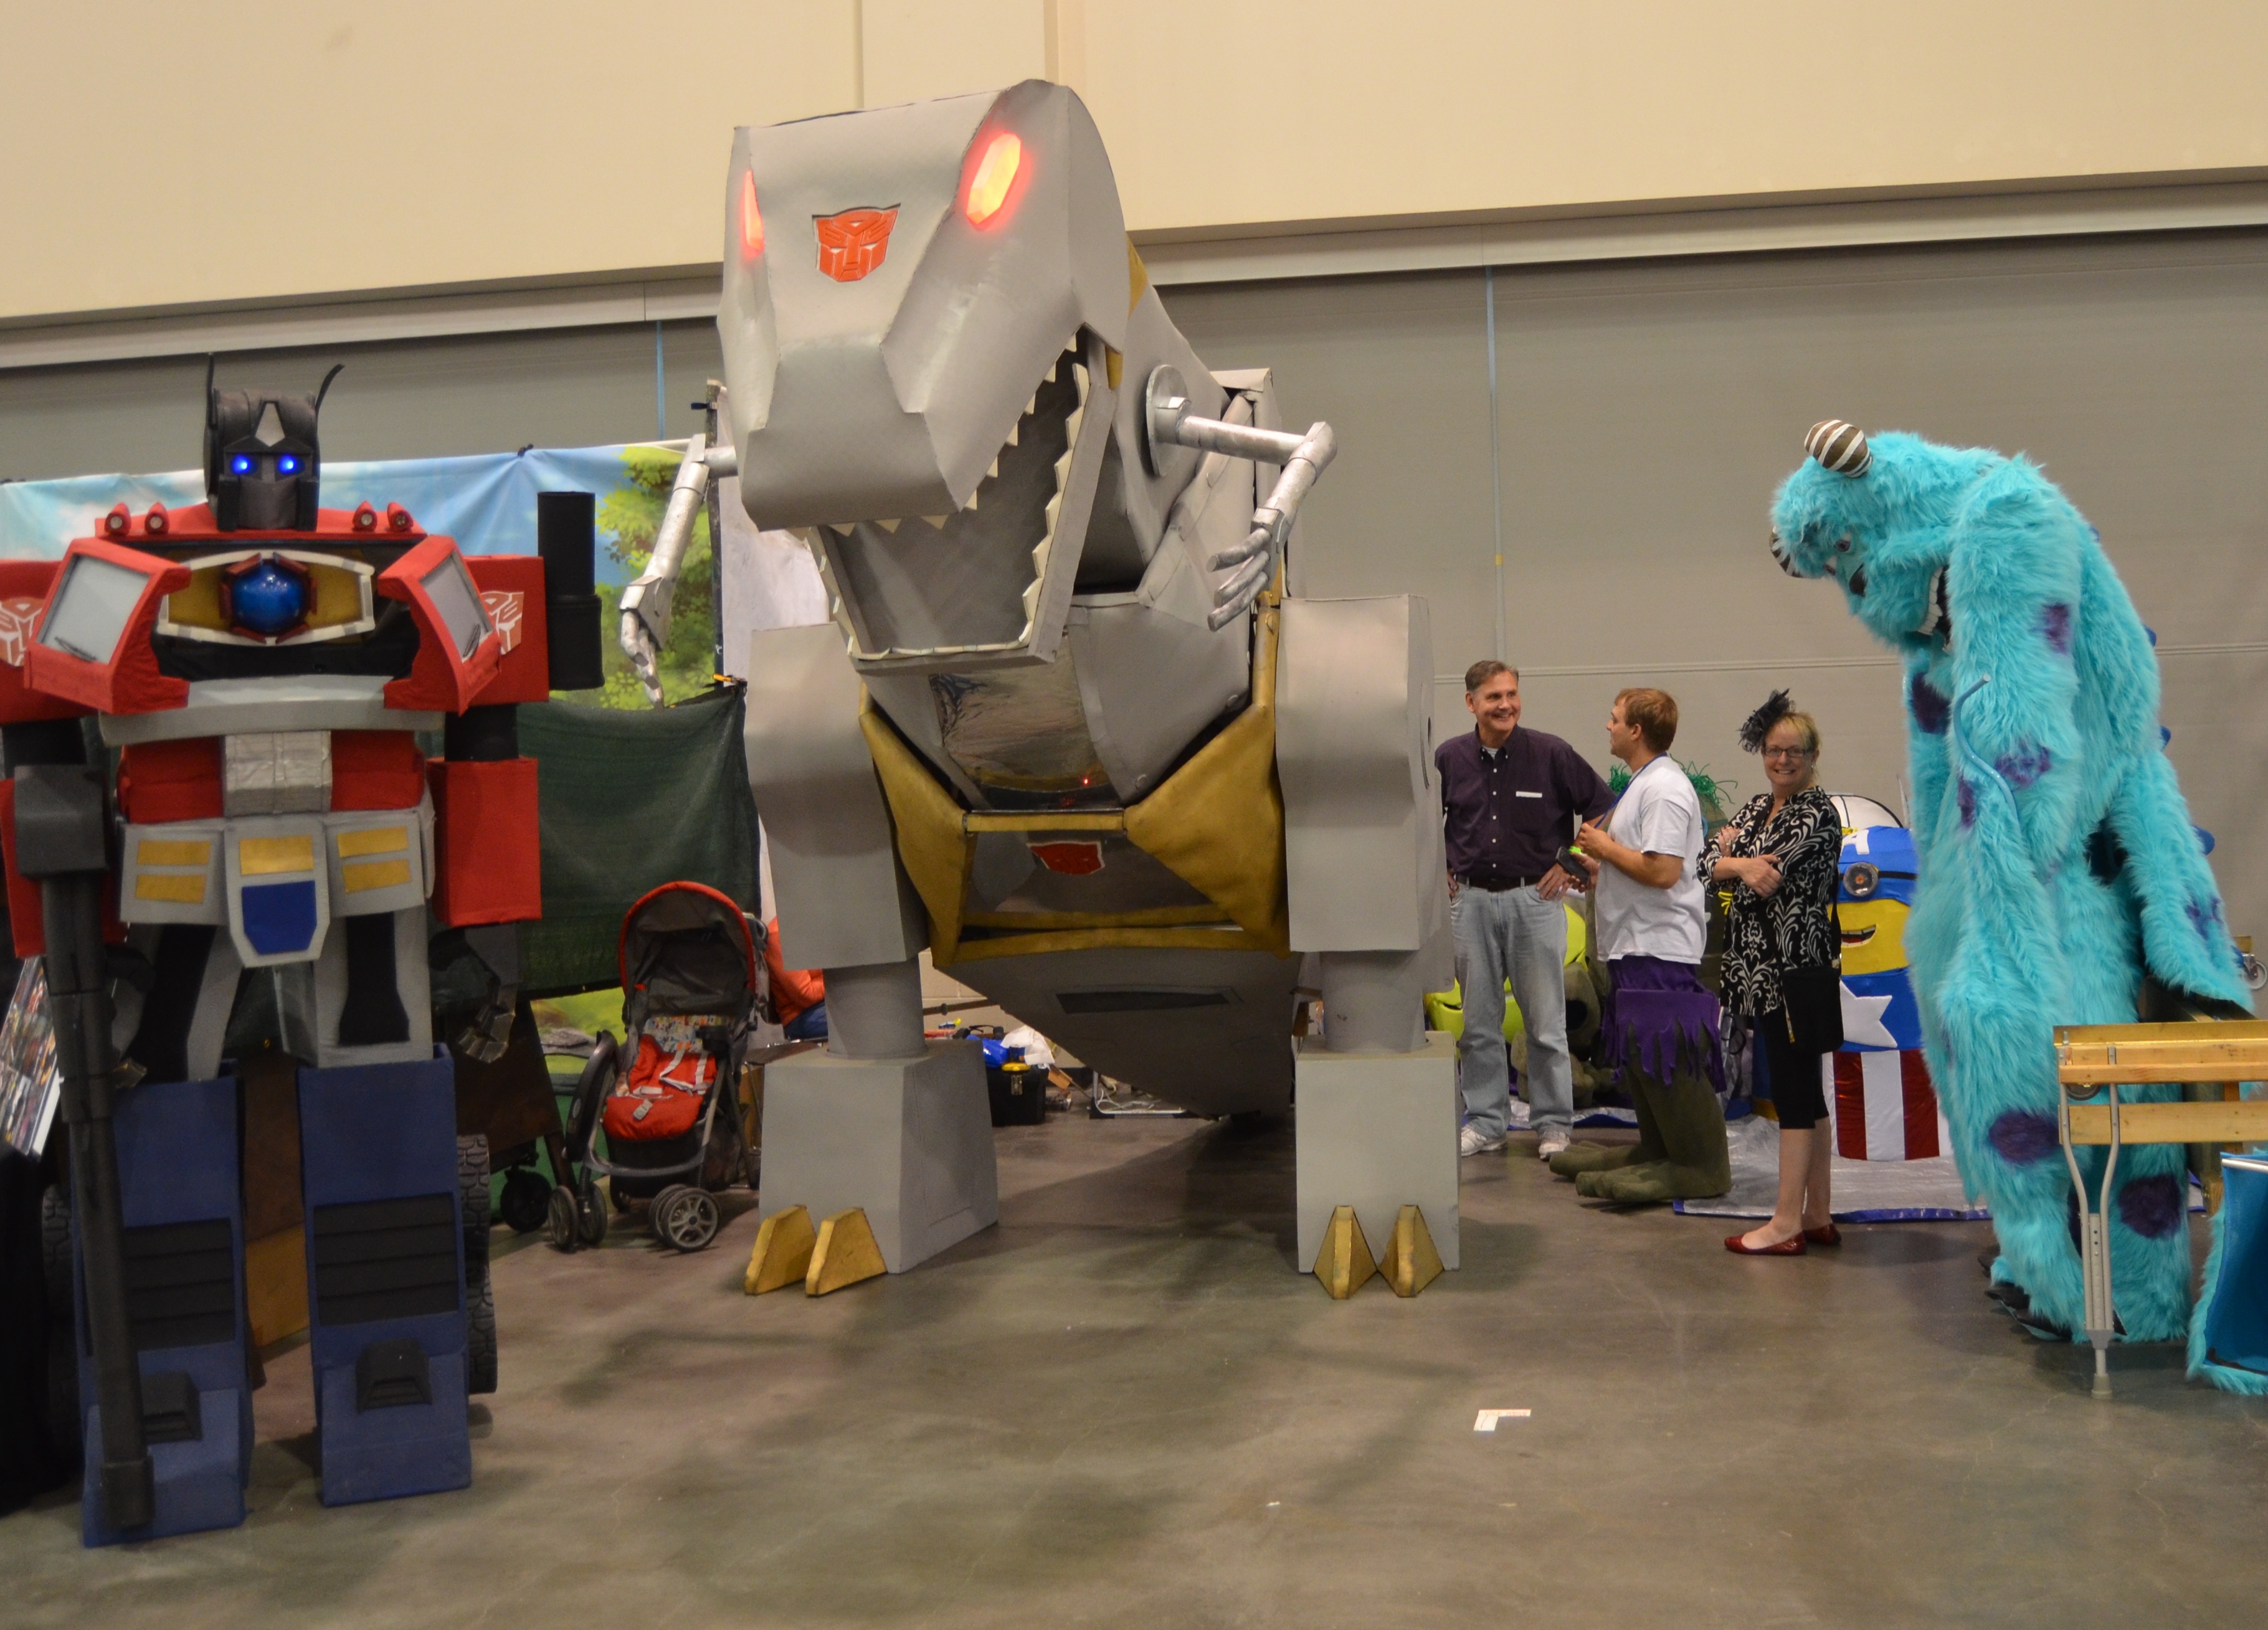 Squirrels Creations are another favorite of the event with Transformers and Minions walking around the floor